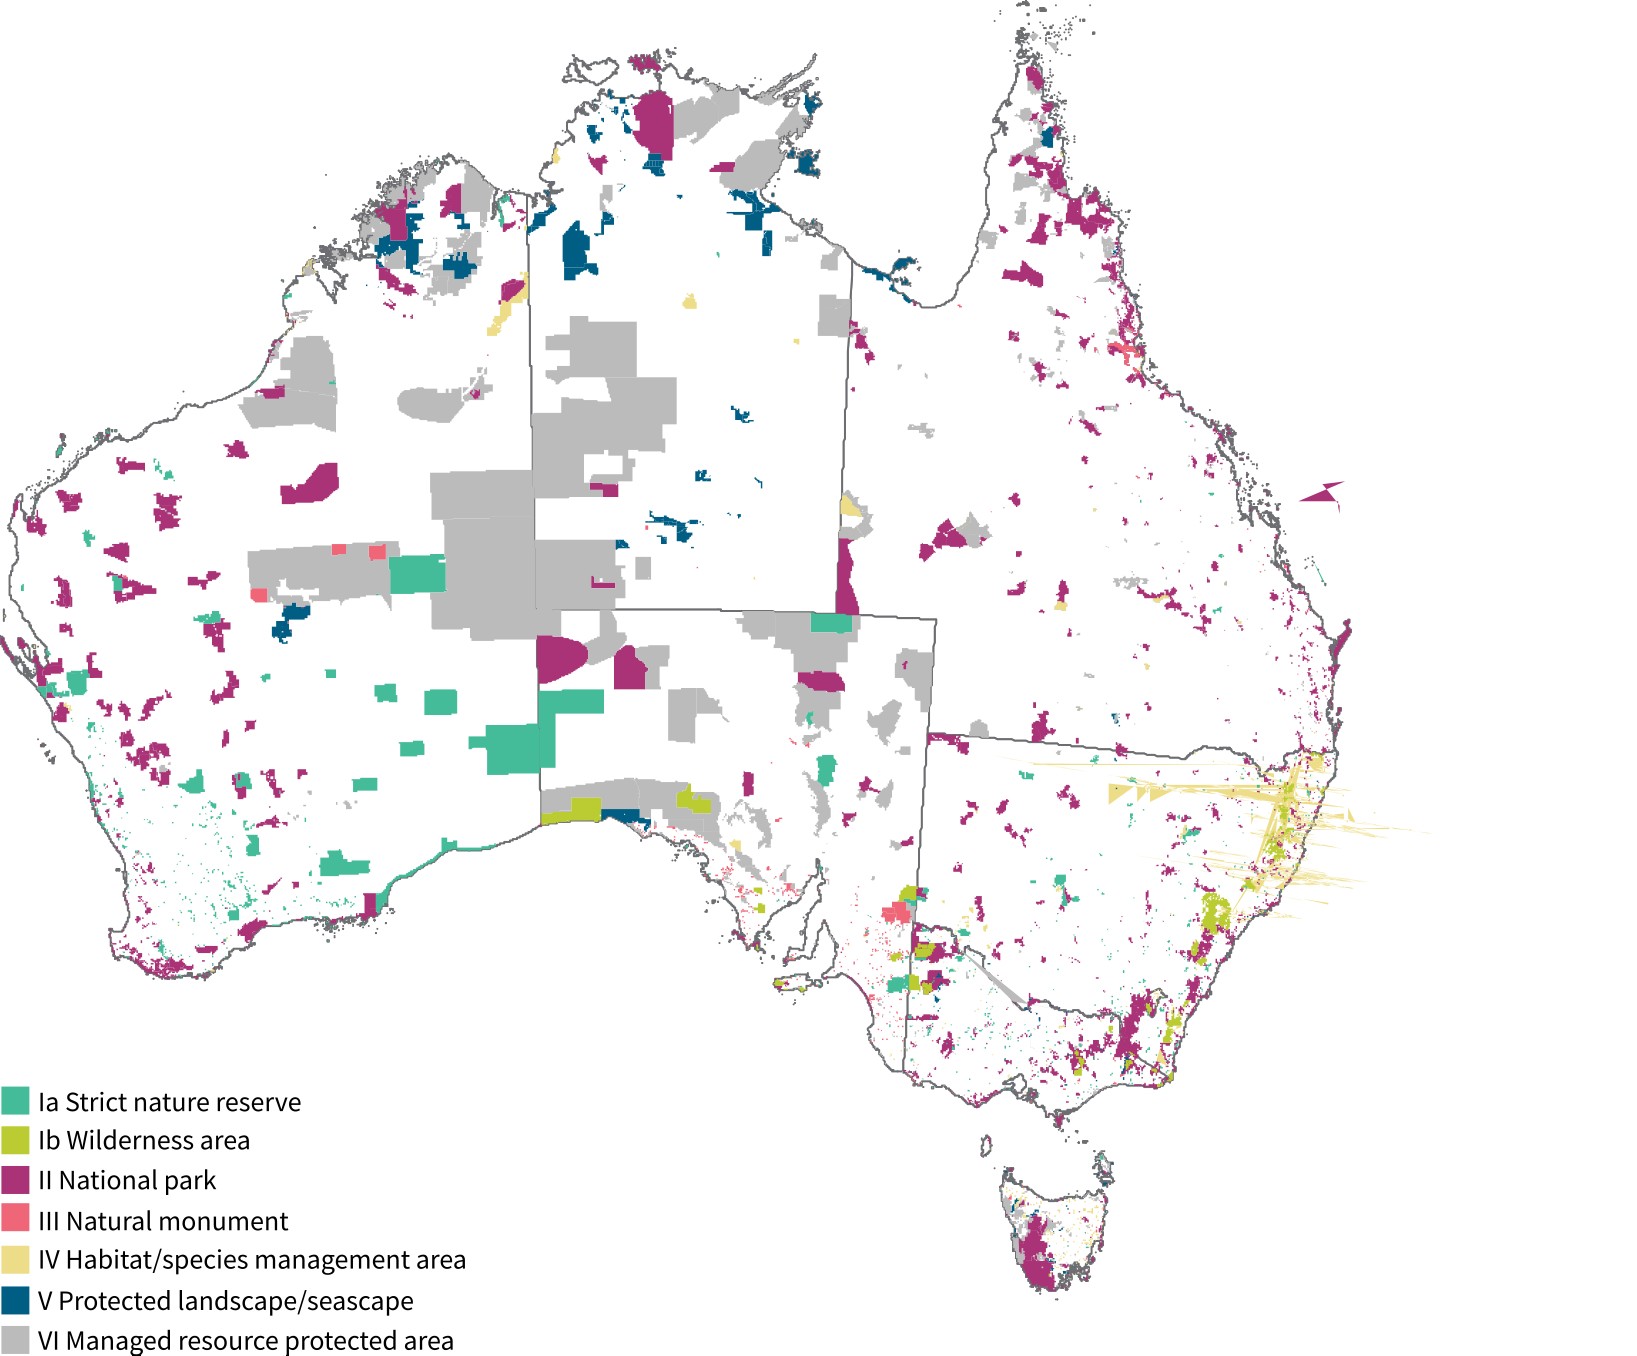 A digital image of the current terrestrial protected area estate across Australia represented in different colours on a map of the continent, published in the State of the Environment 2021 report.